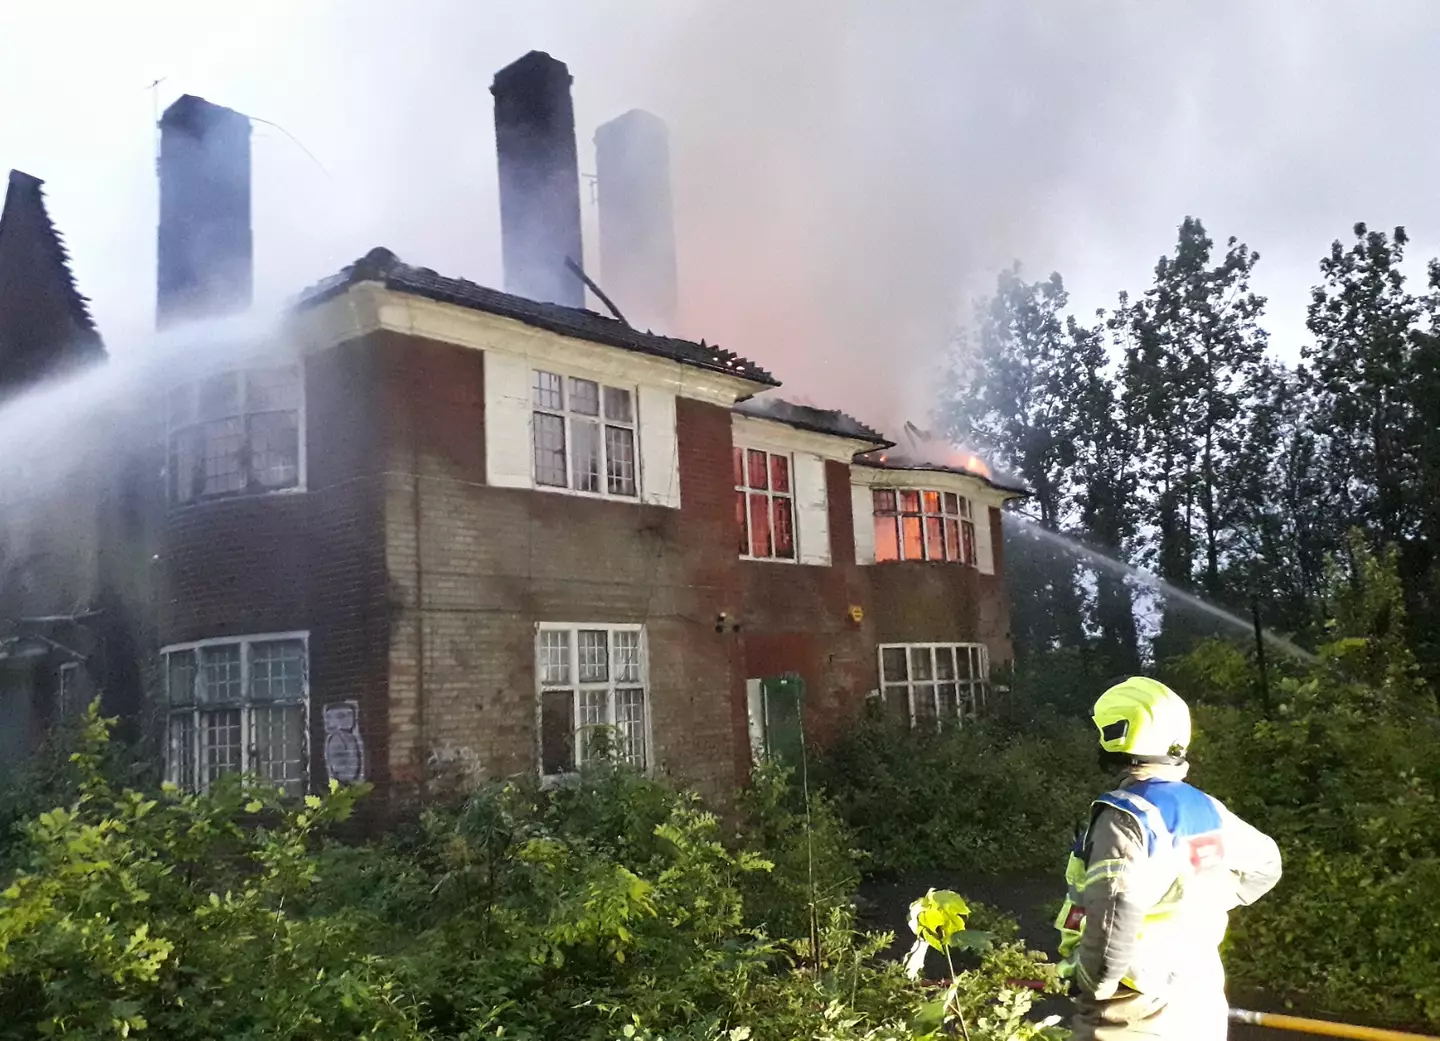 A house on one of the most expensive streets in the world has been almost completely destroyed by a fire.